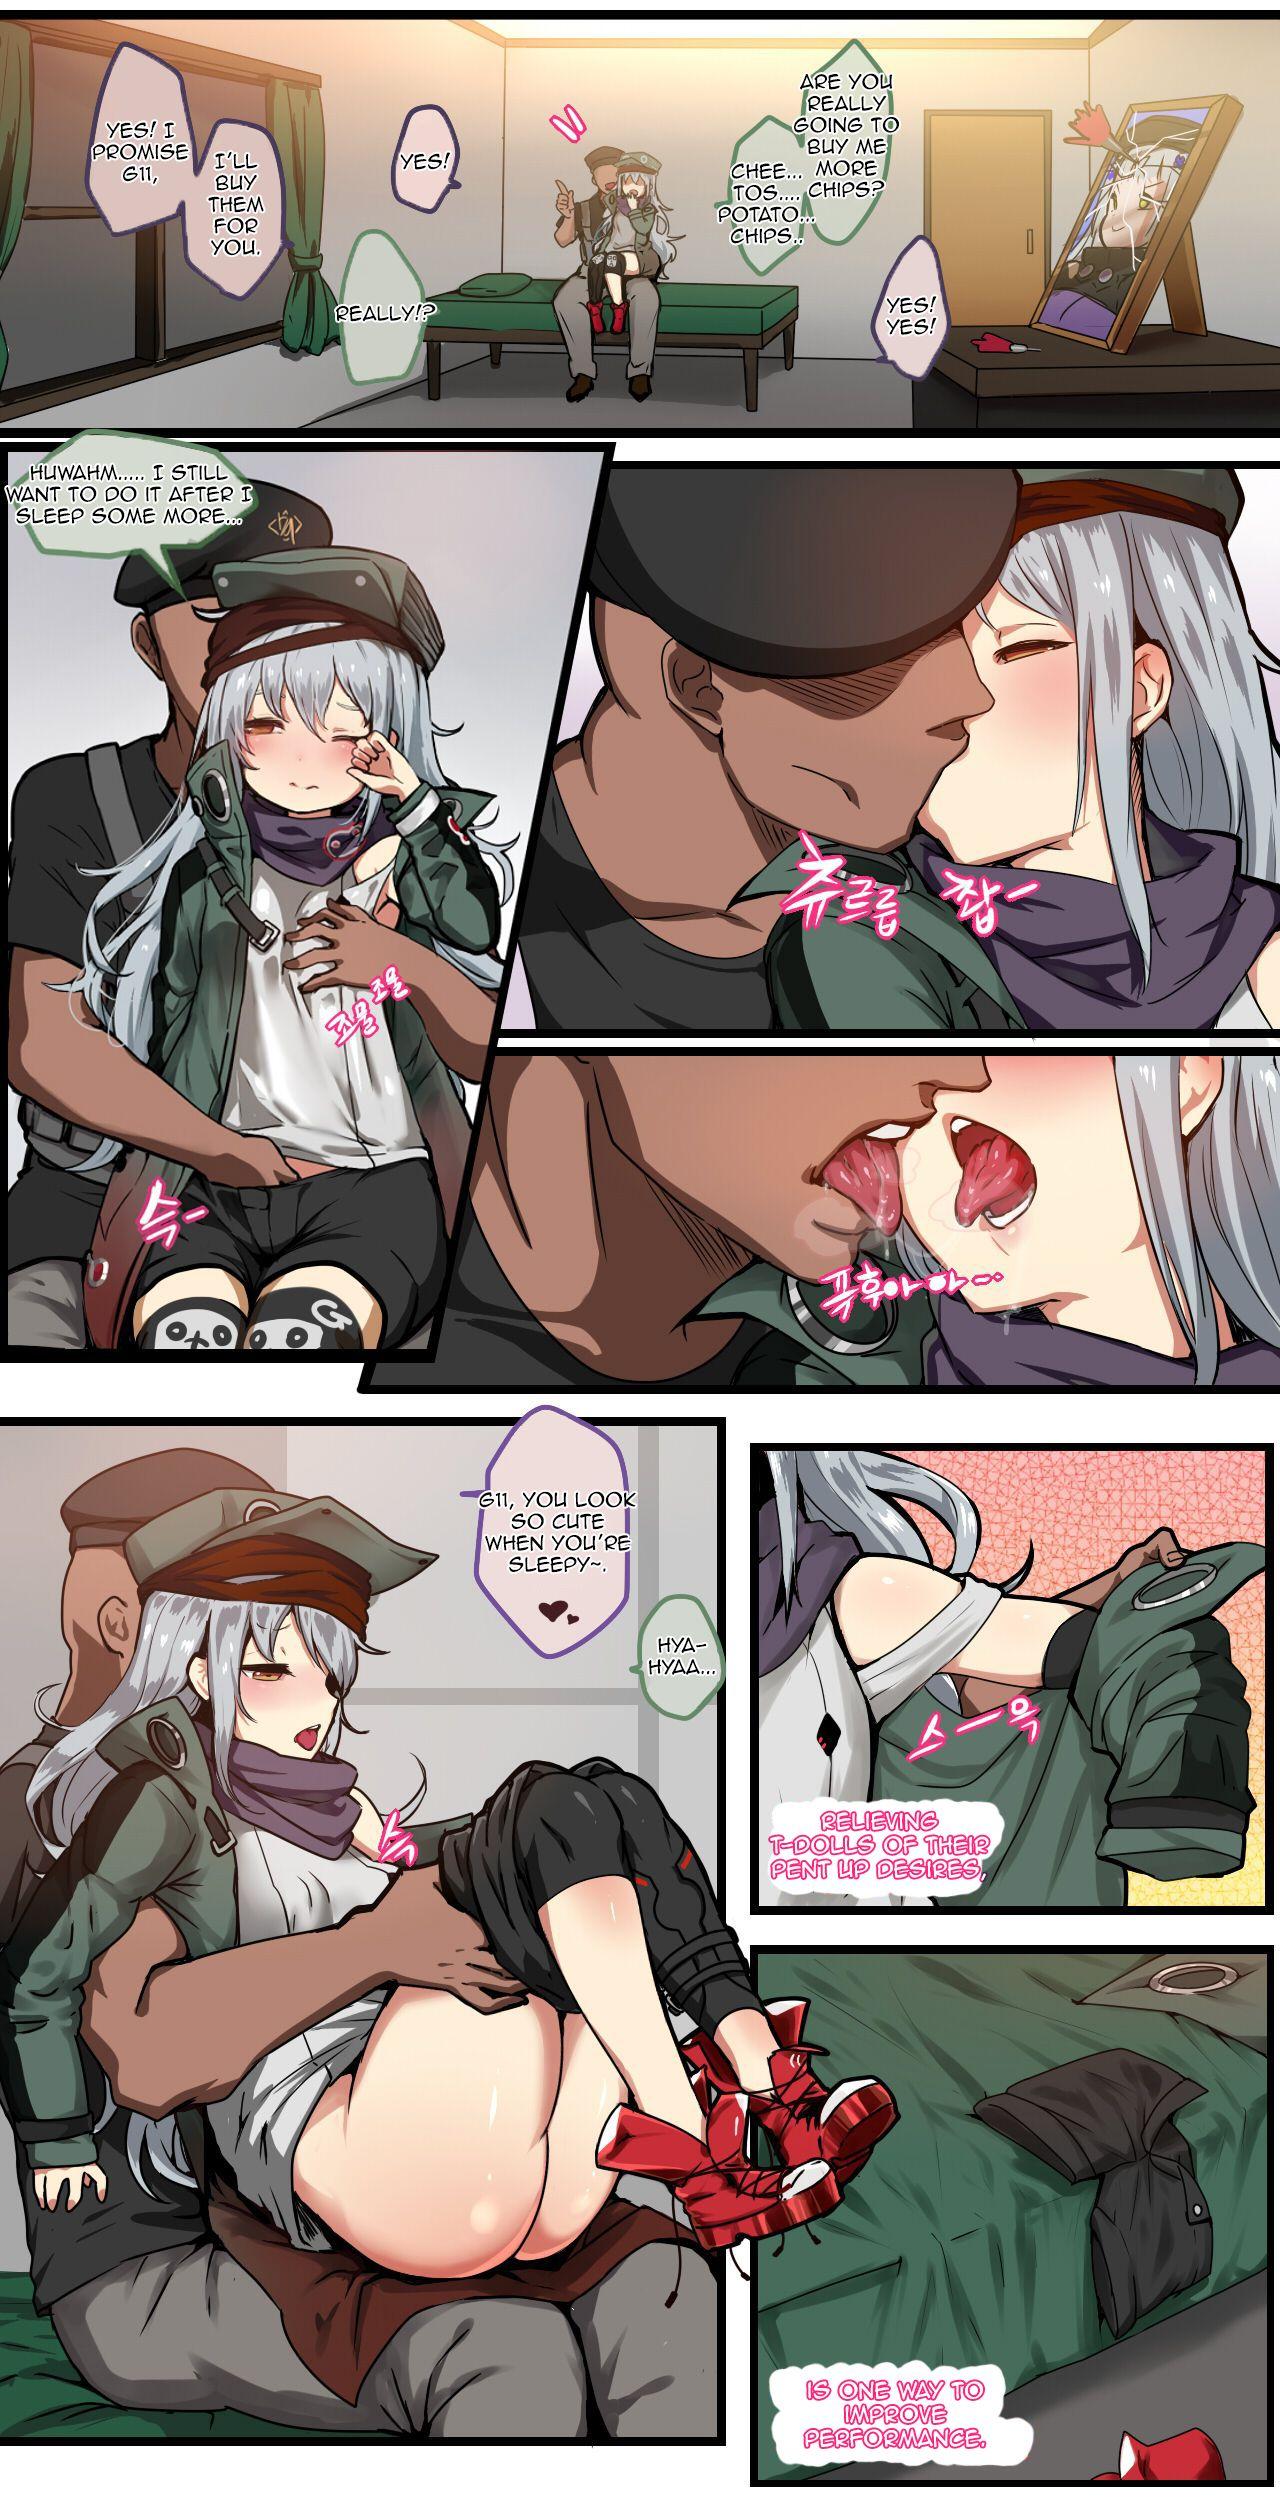 Sixtynine How to use dolls 01 - Girls frontline Vietnam - Page 2